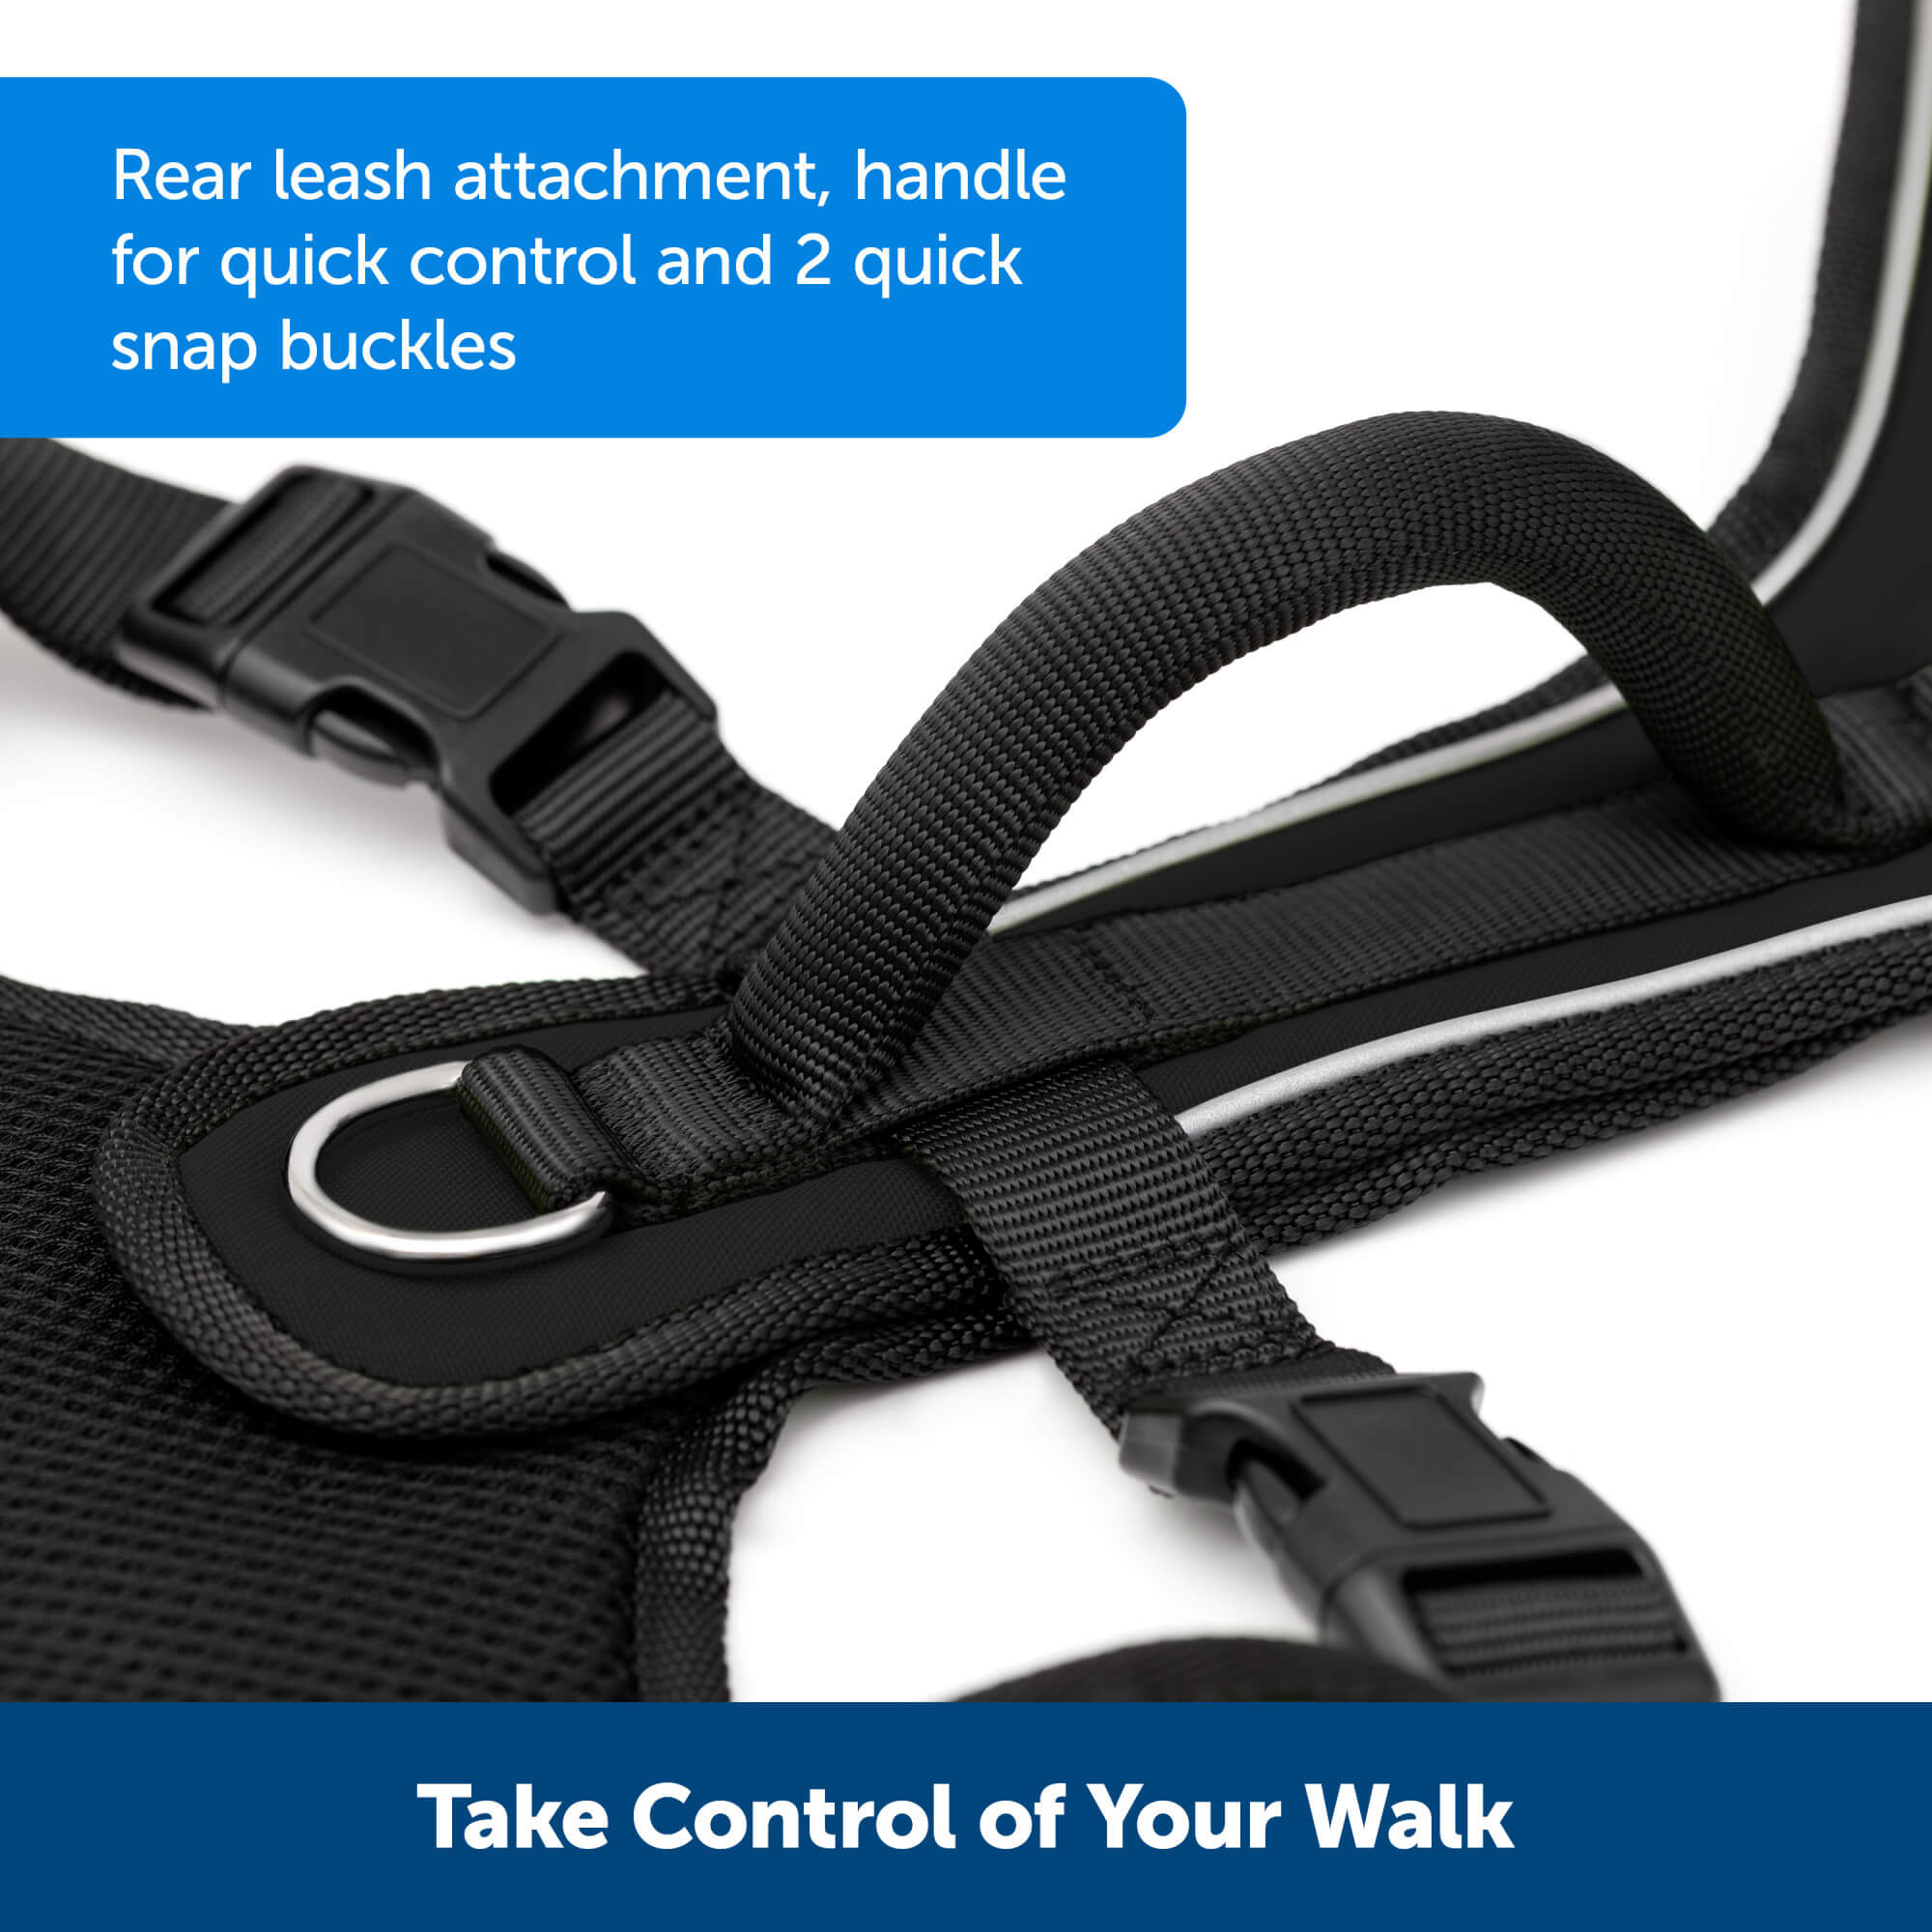 Take control of your walks